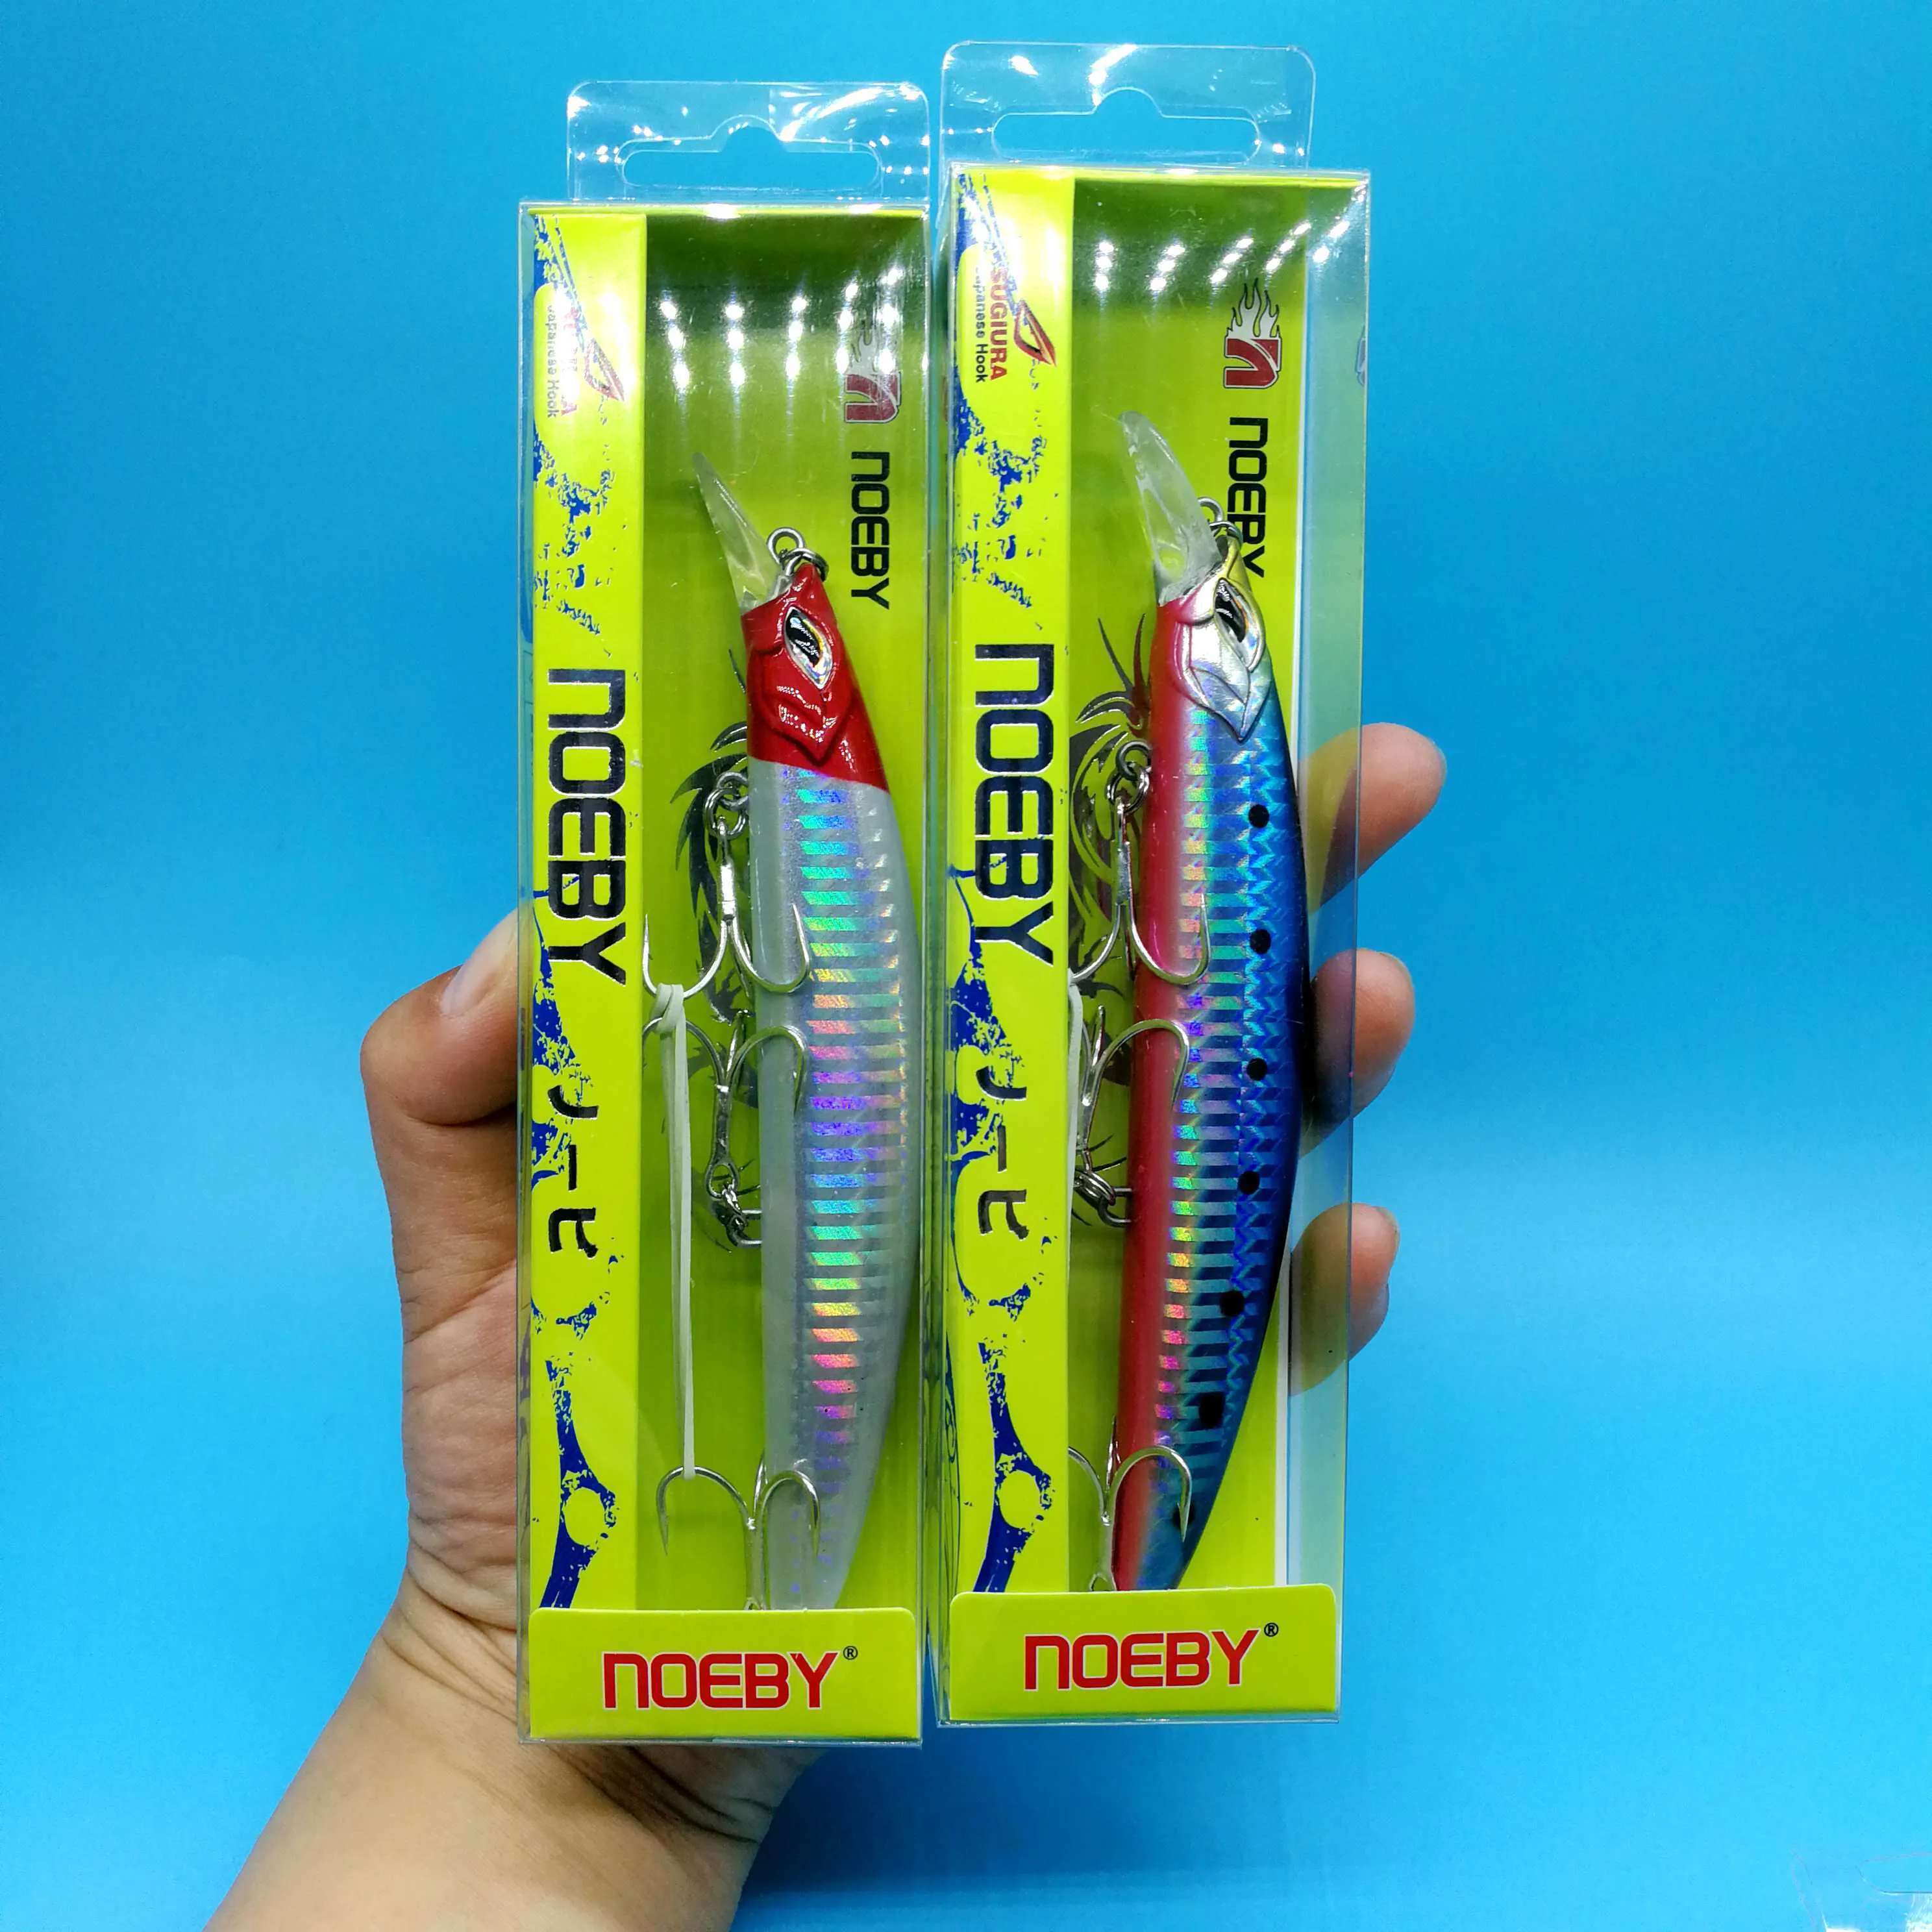 NOEBY 2019 Floating Minnow Rainbow Trout Lures Set 23g, 130mm, 0 1.5m  Depth, Wobbler Hard Bait For Saltwater Fishing Tackle T20274g From Fed26,  $21.7